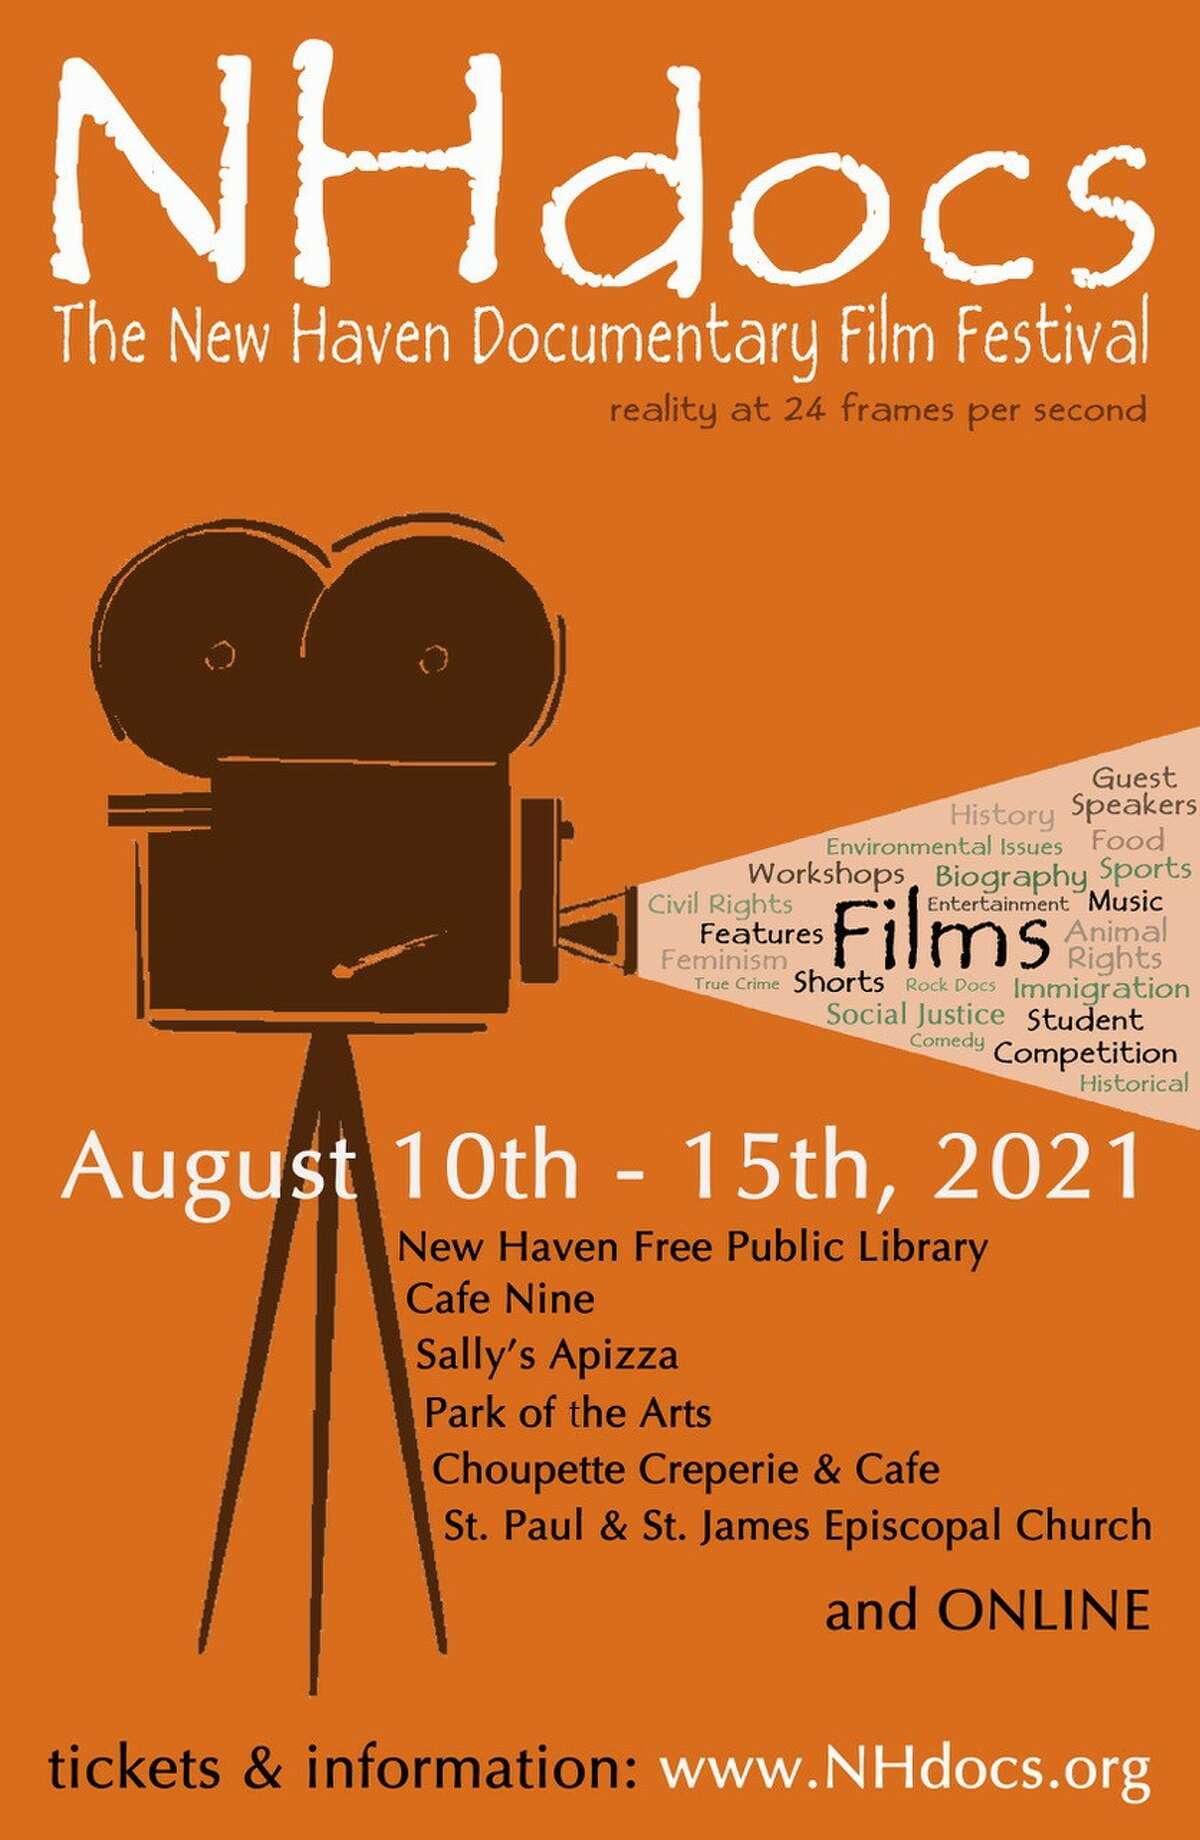 More than 100 films are coming to this year’s New Haven Documentary Film Festival August 10 through 15. 